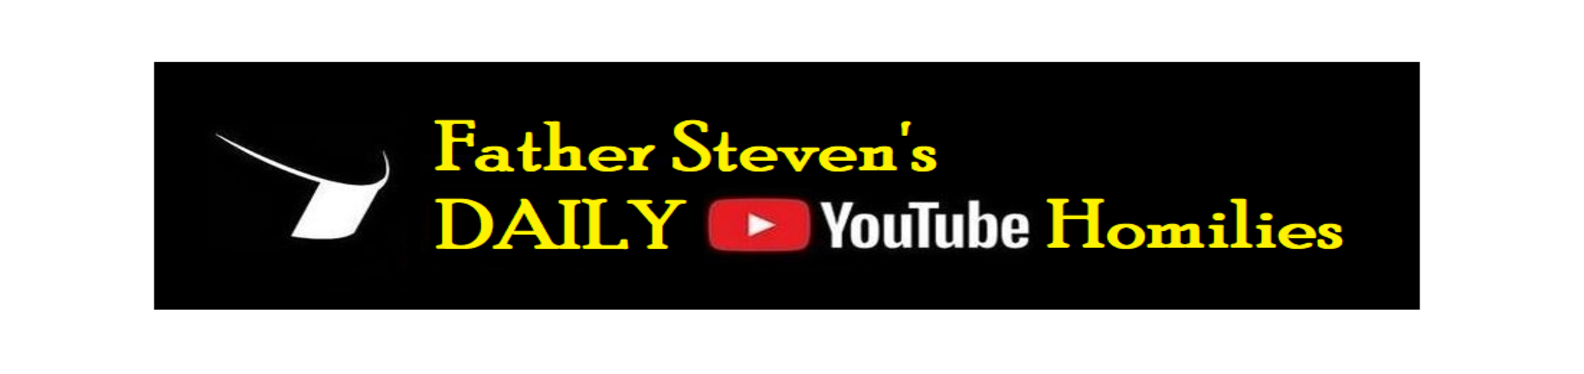 father stevens daily youtube homilies